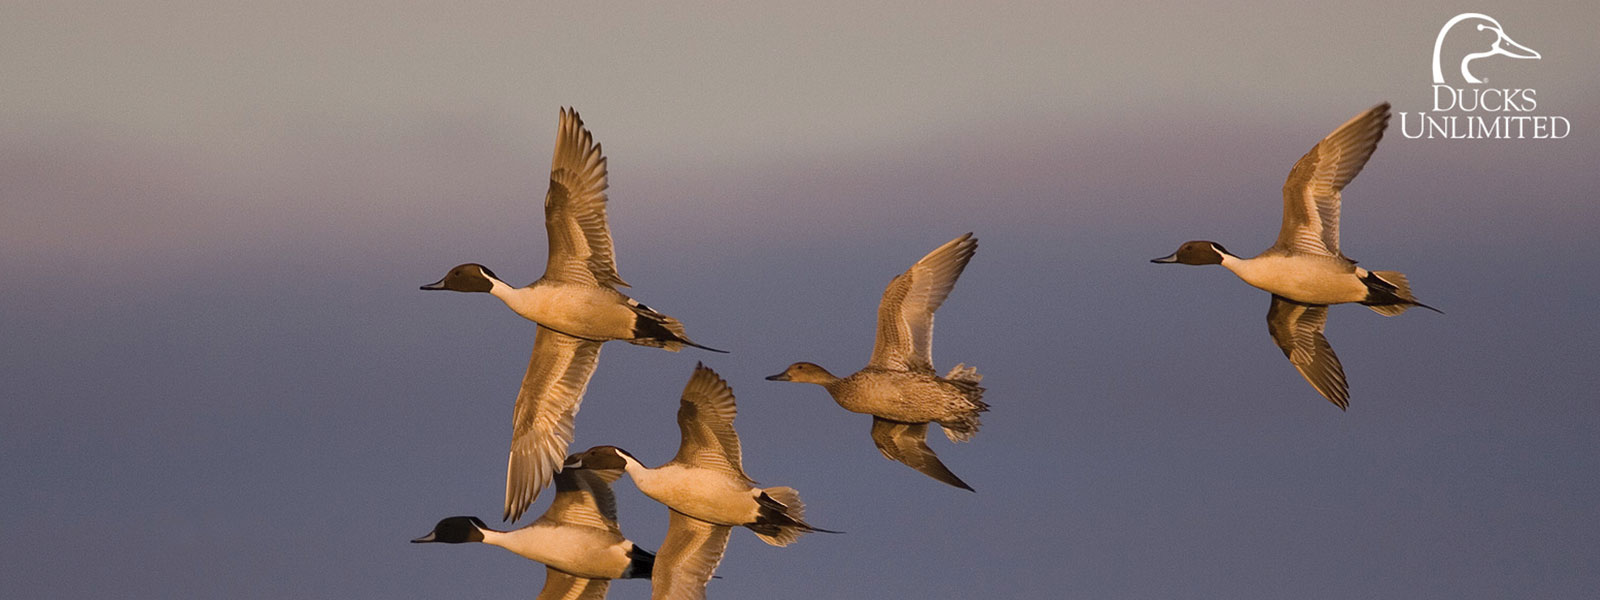 Flint Hills Resources Donates $65,000 To Protect Waterfowl Habitat